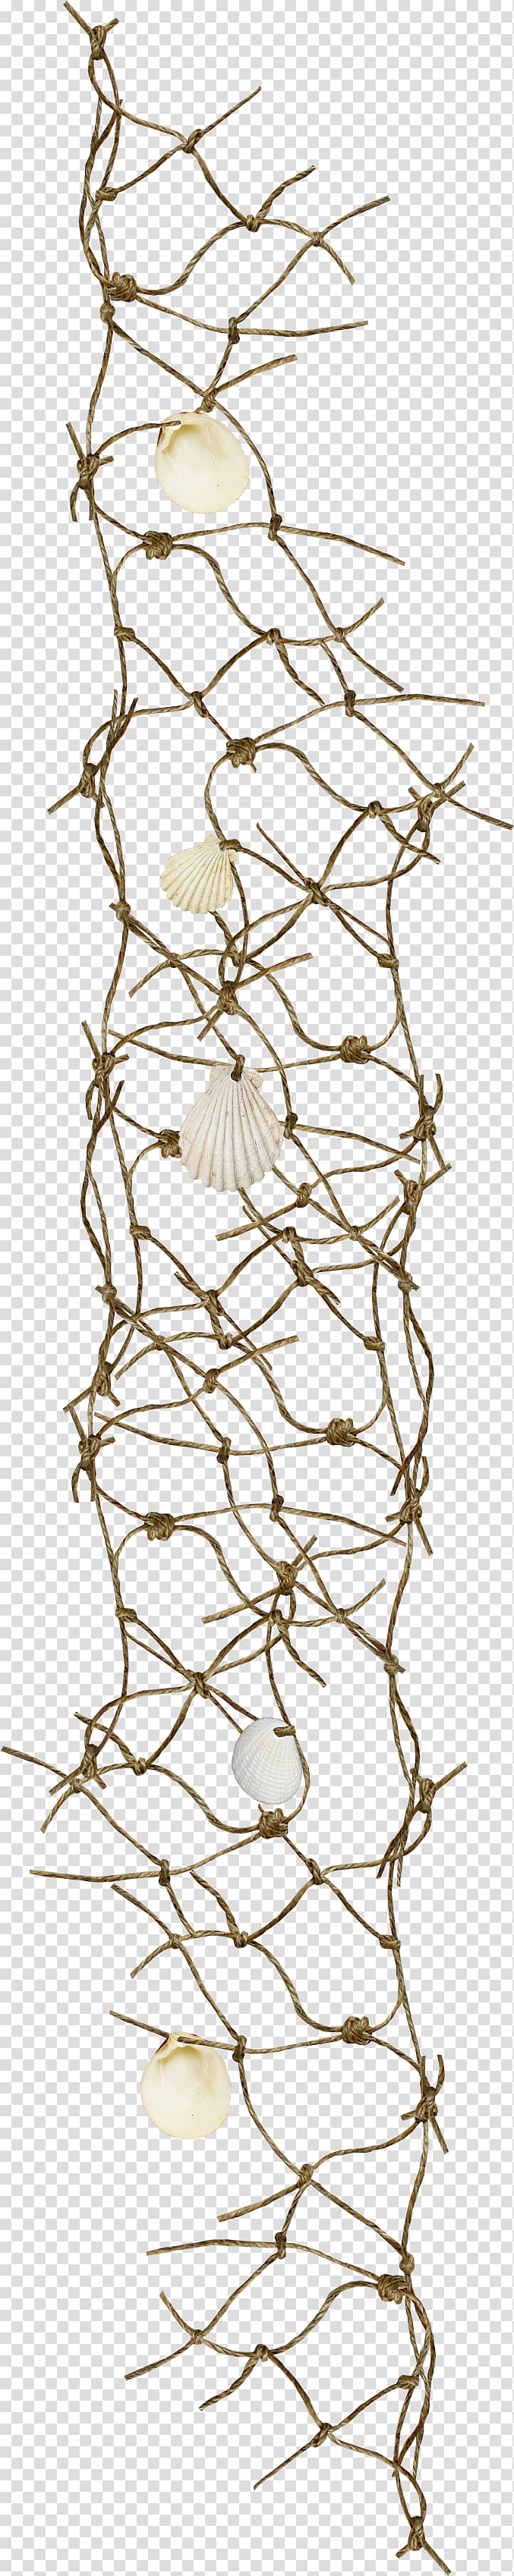 https://p7.hiclipart.com/preview/173/690/500/fishing-net-rope-clip-art-brown-rope-nets-scallop.jpg